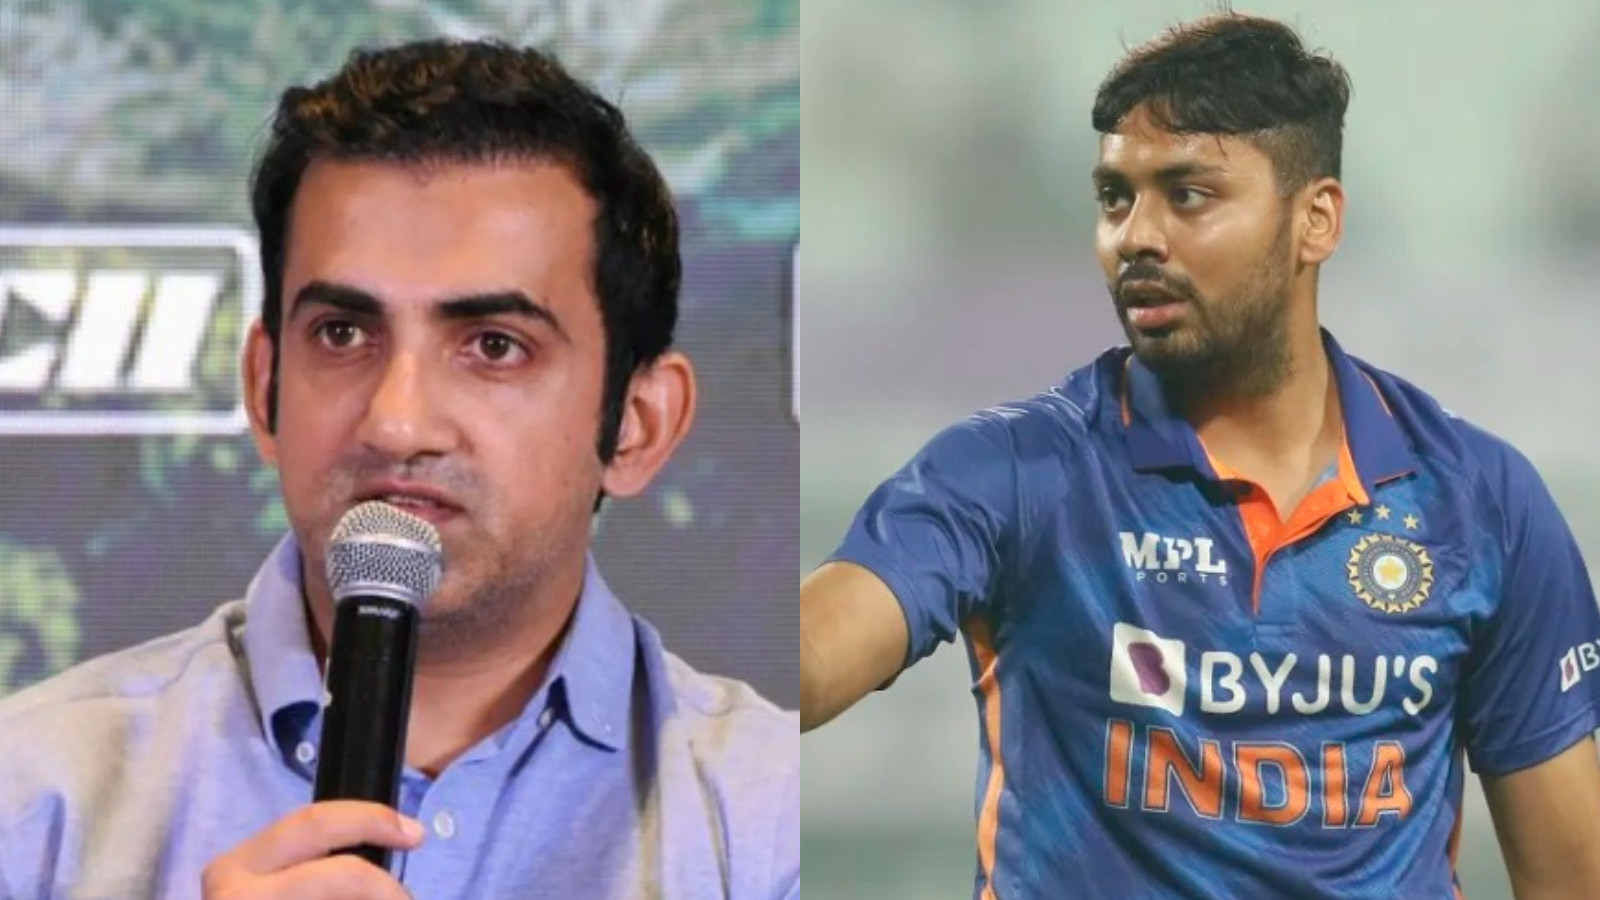 IND v SA 2022: 'He has the attitude that a fast bowler should have' - Gambhir lauds Avesh Khan